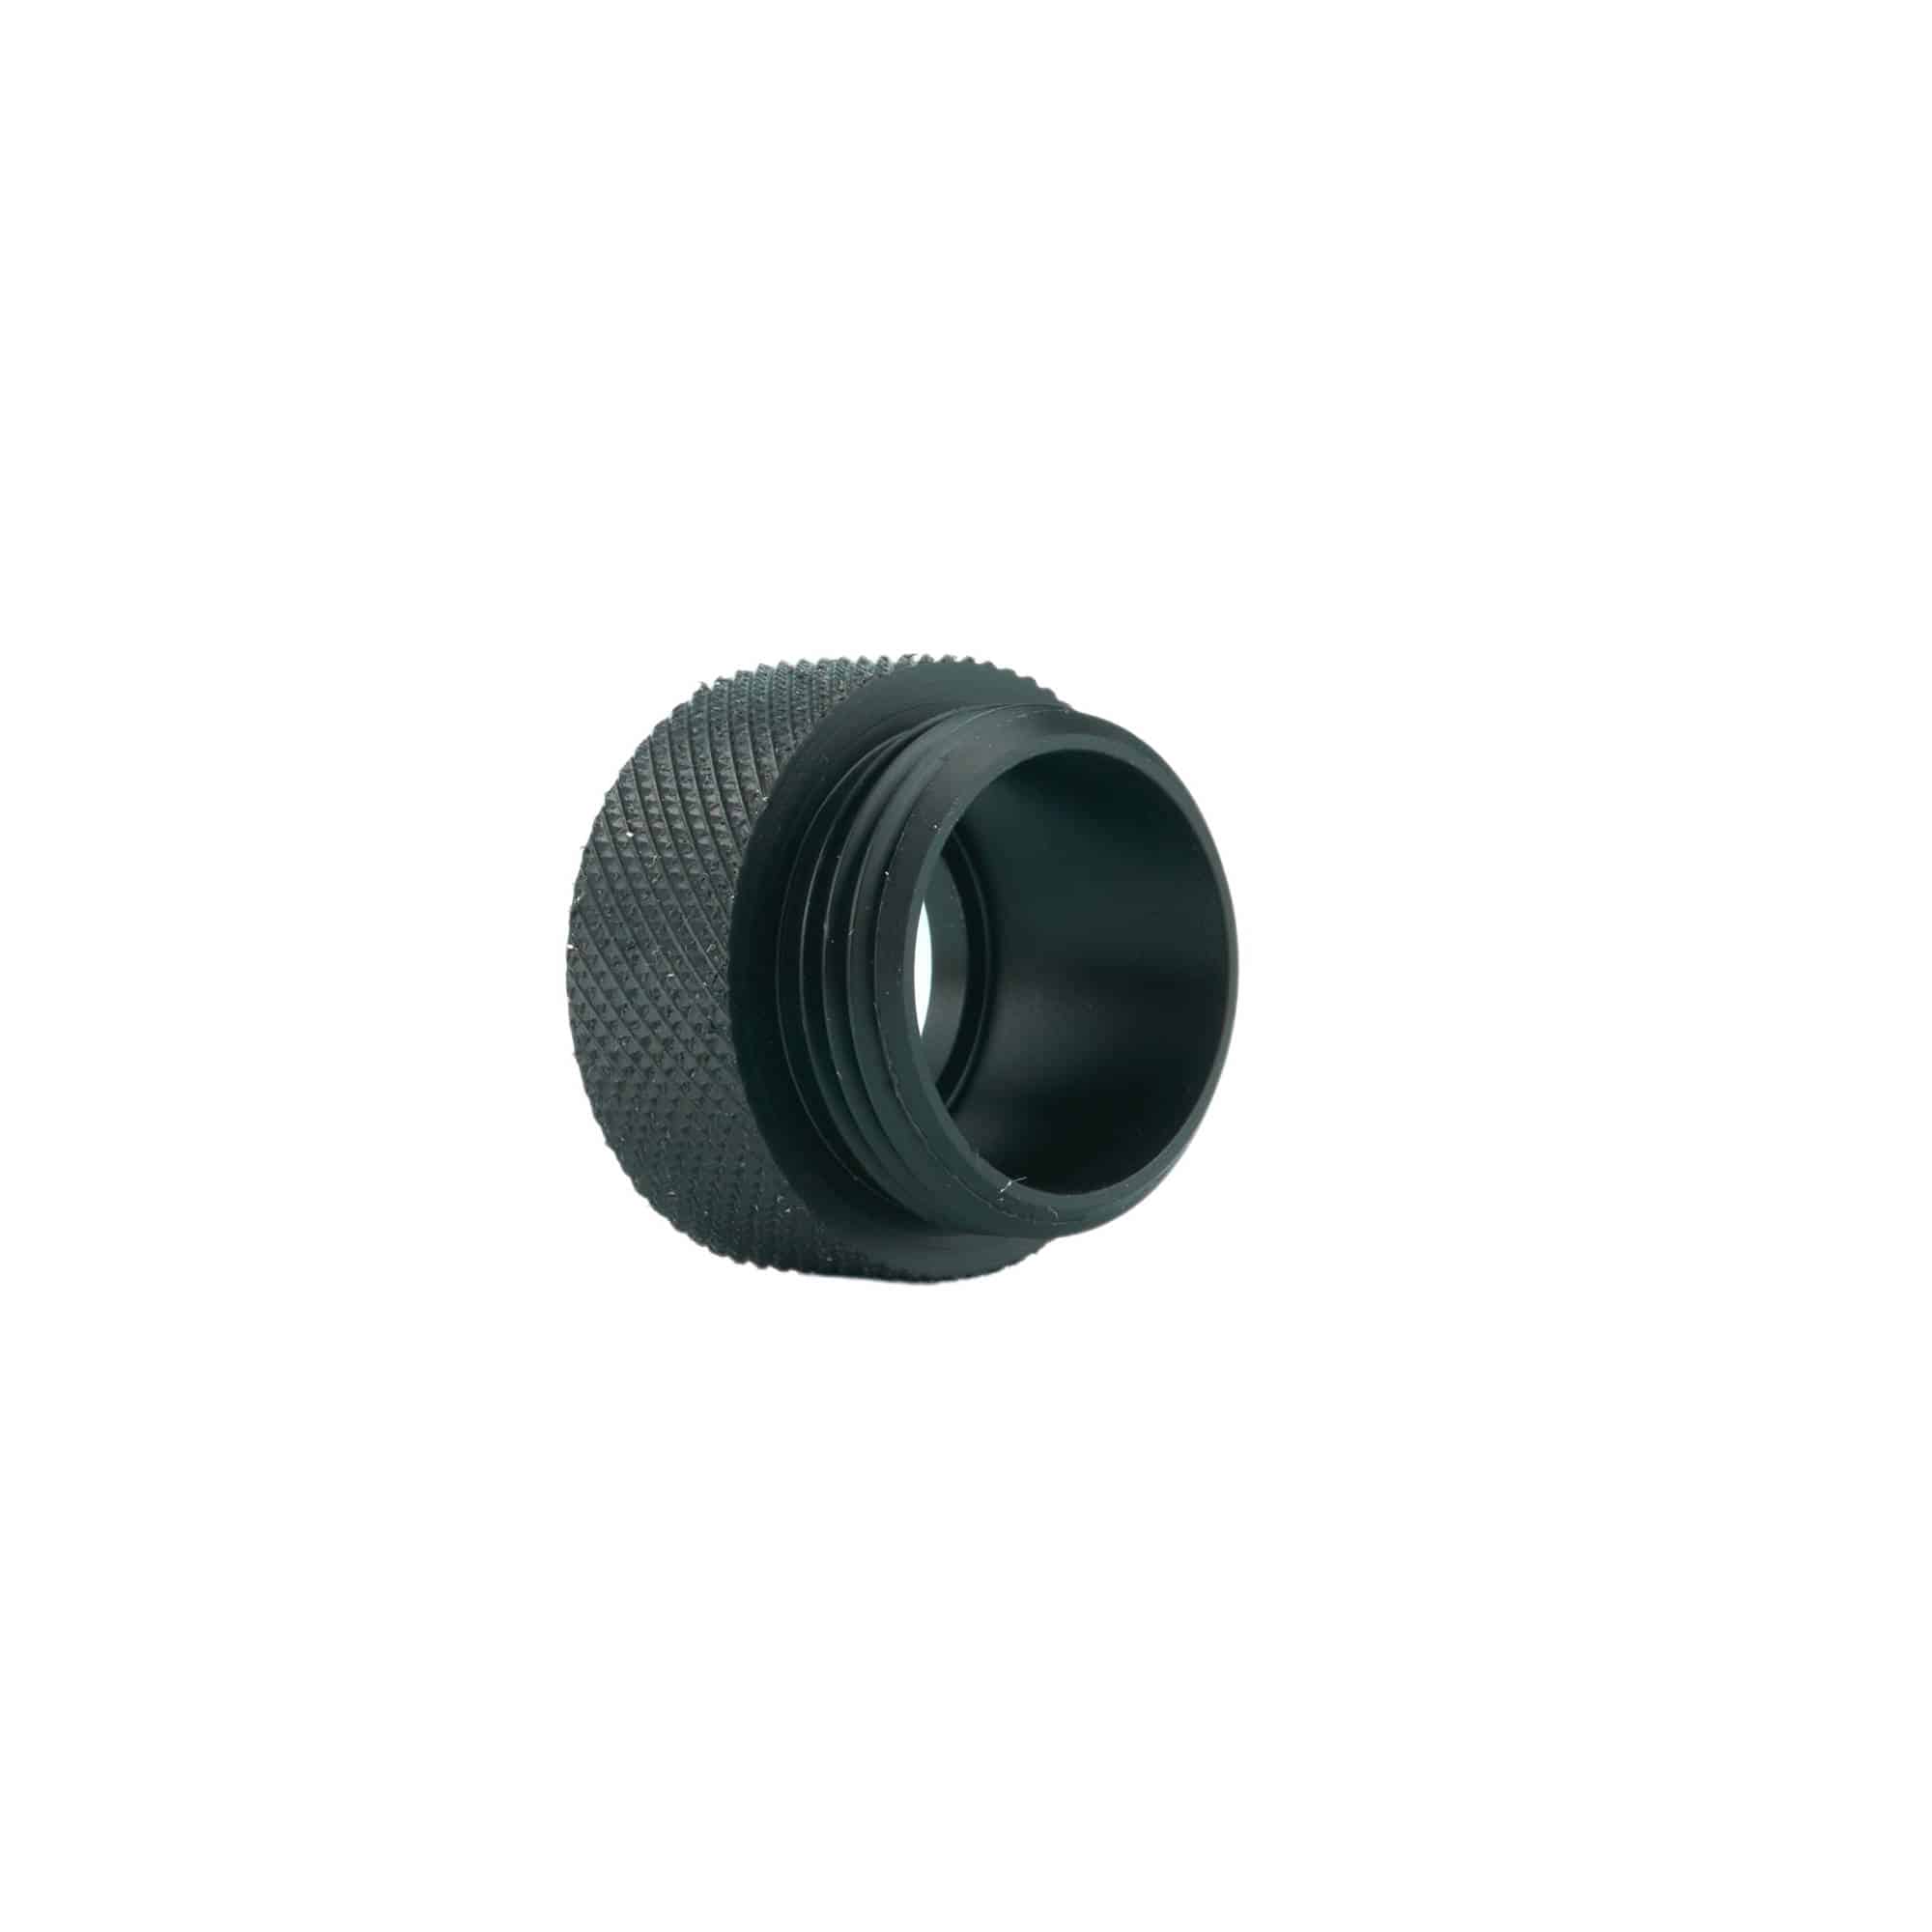 RM rubber molded connector Locking sleeve -MLS-G